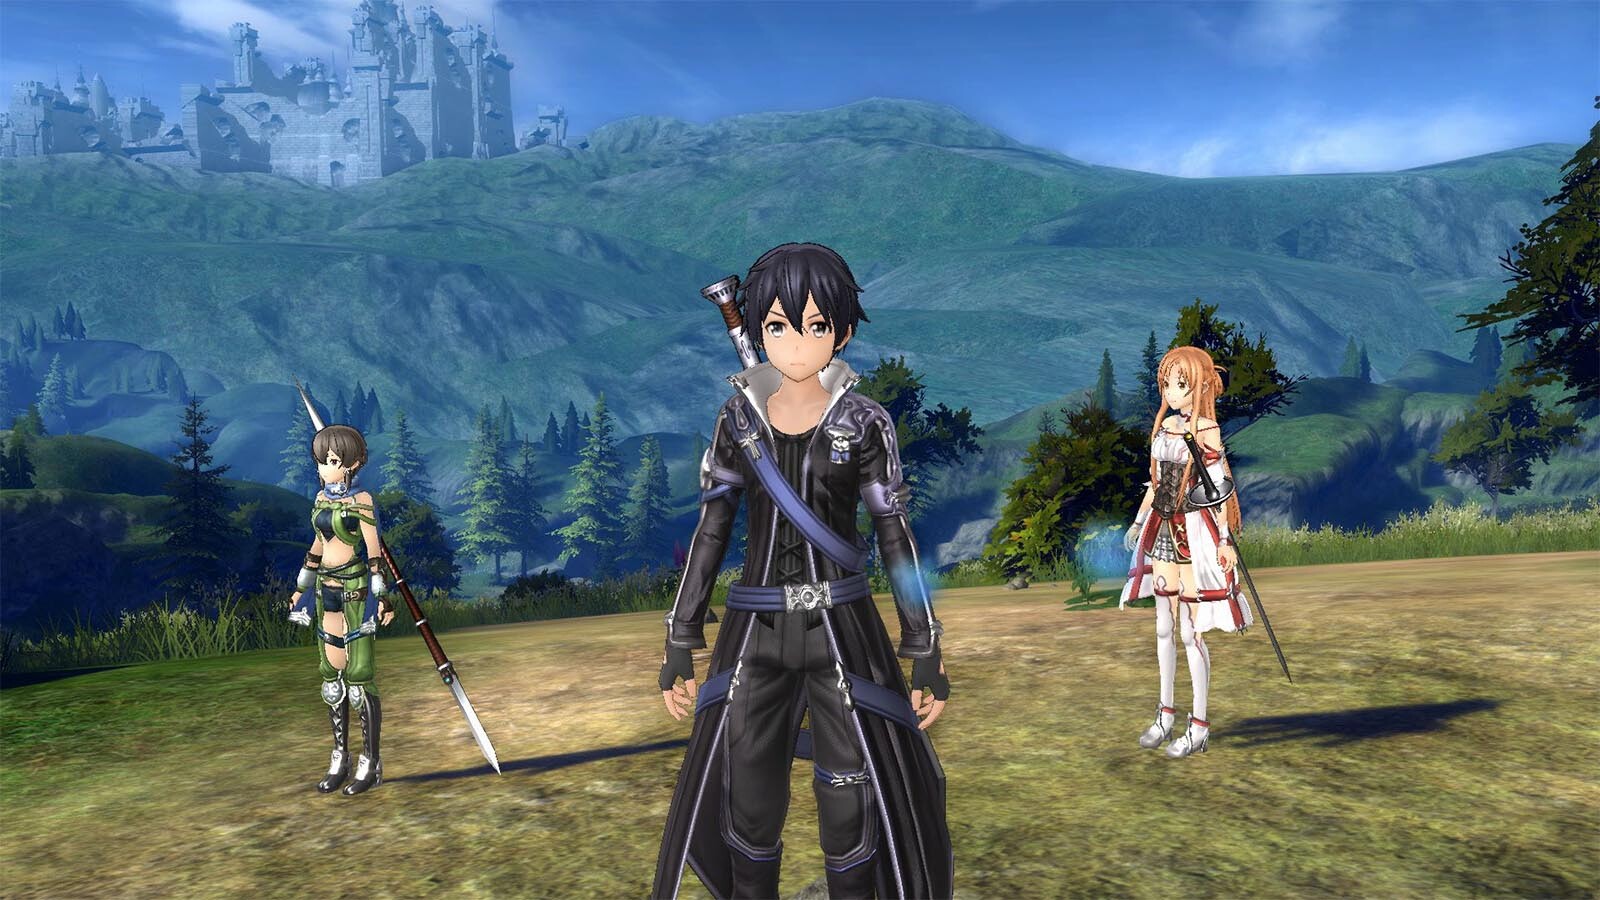 Sword Art Online: Hollow Realization Deluxe Edition - PC - Compre